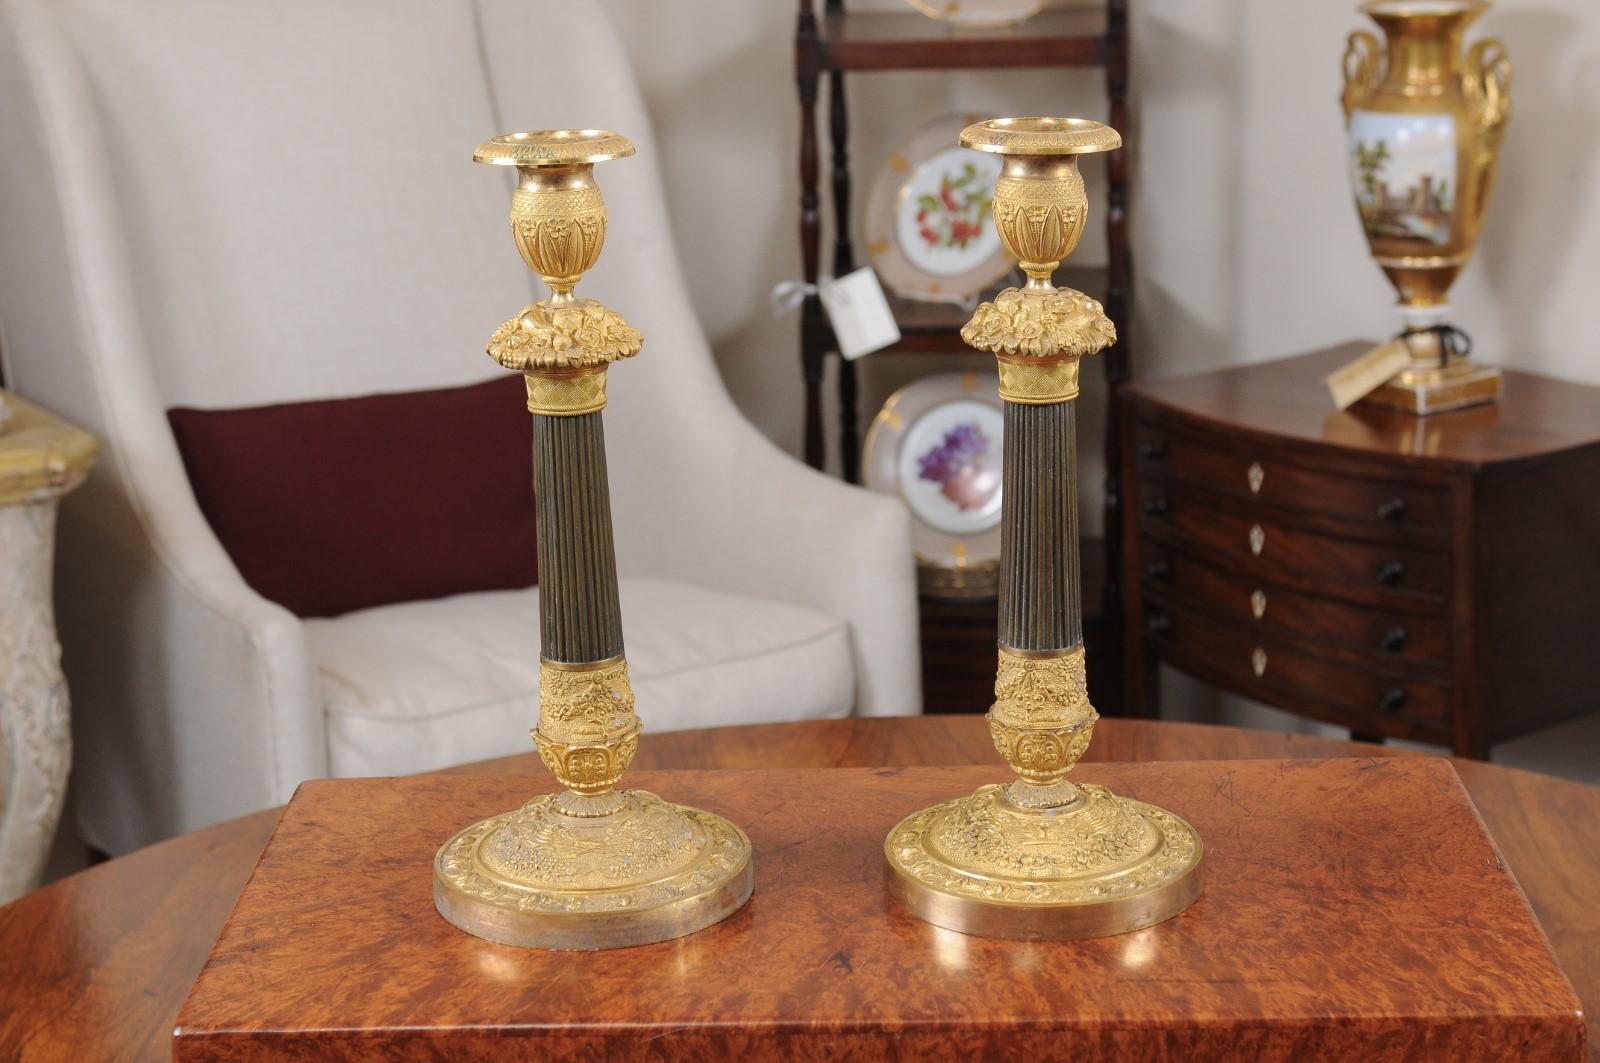 Pair of Bronze Dore Candlesticks with Foliage Design, Early 19th Century France For Sale 1